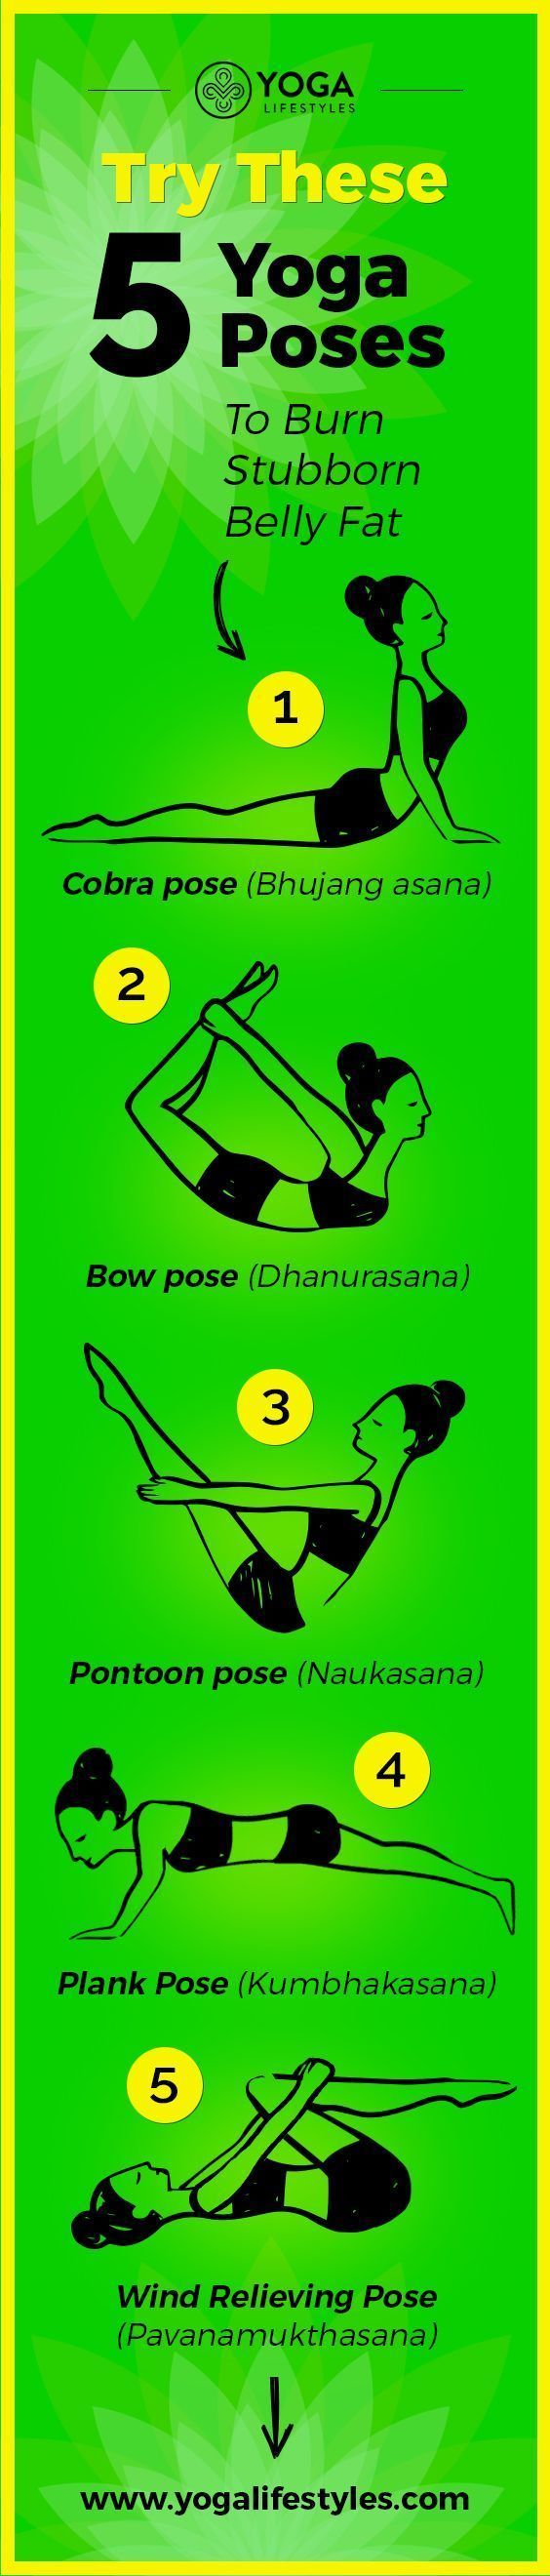 Try These 5 Yoga Poses To Burn Stubborn Belly Fat